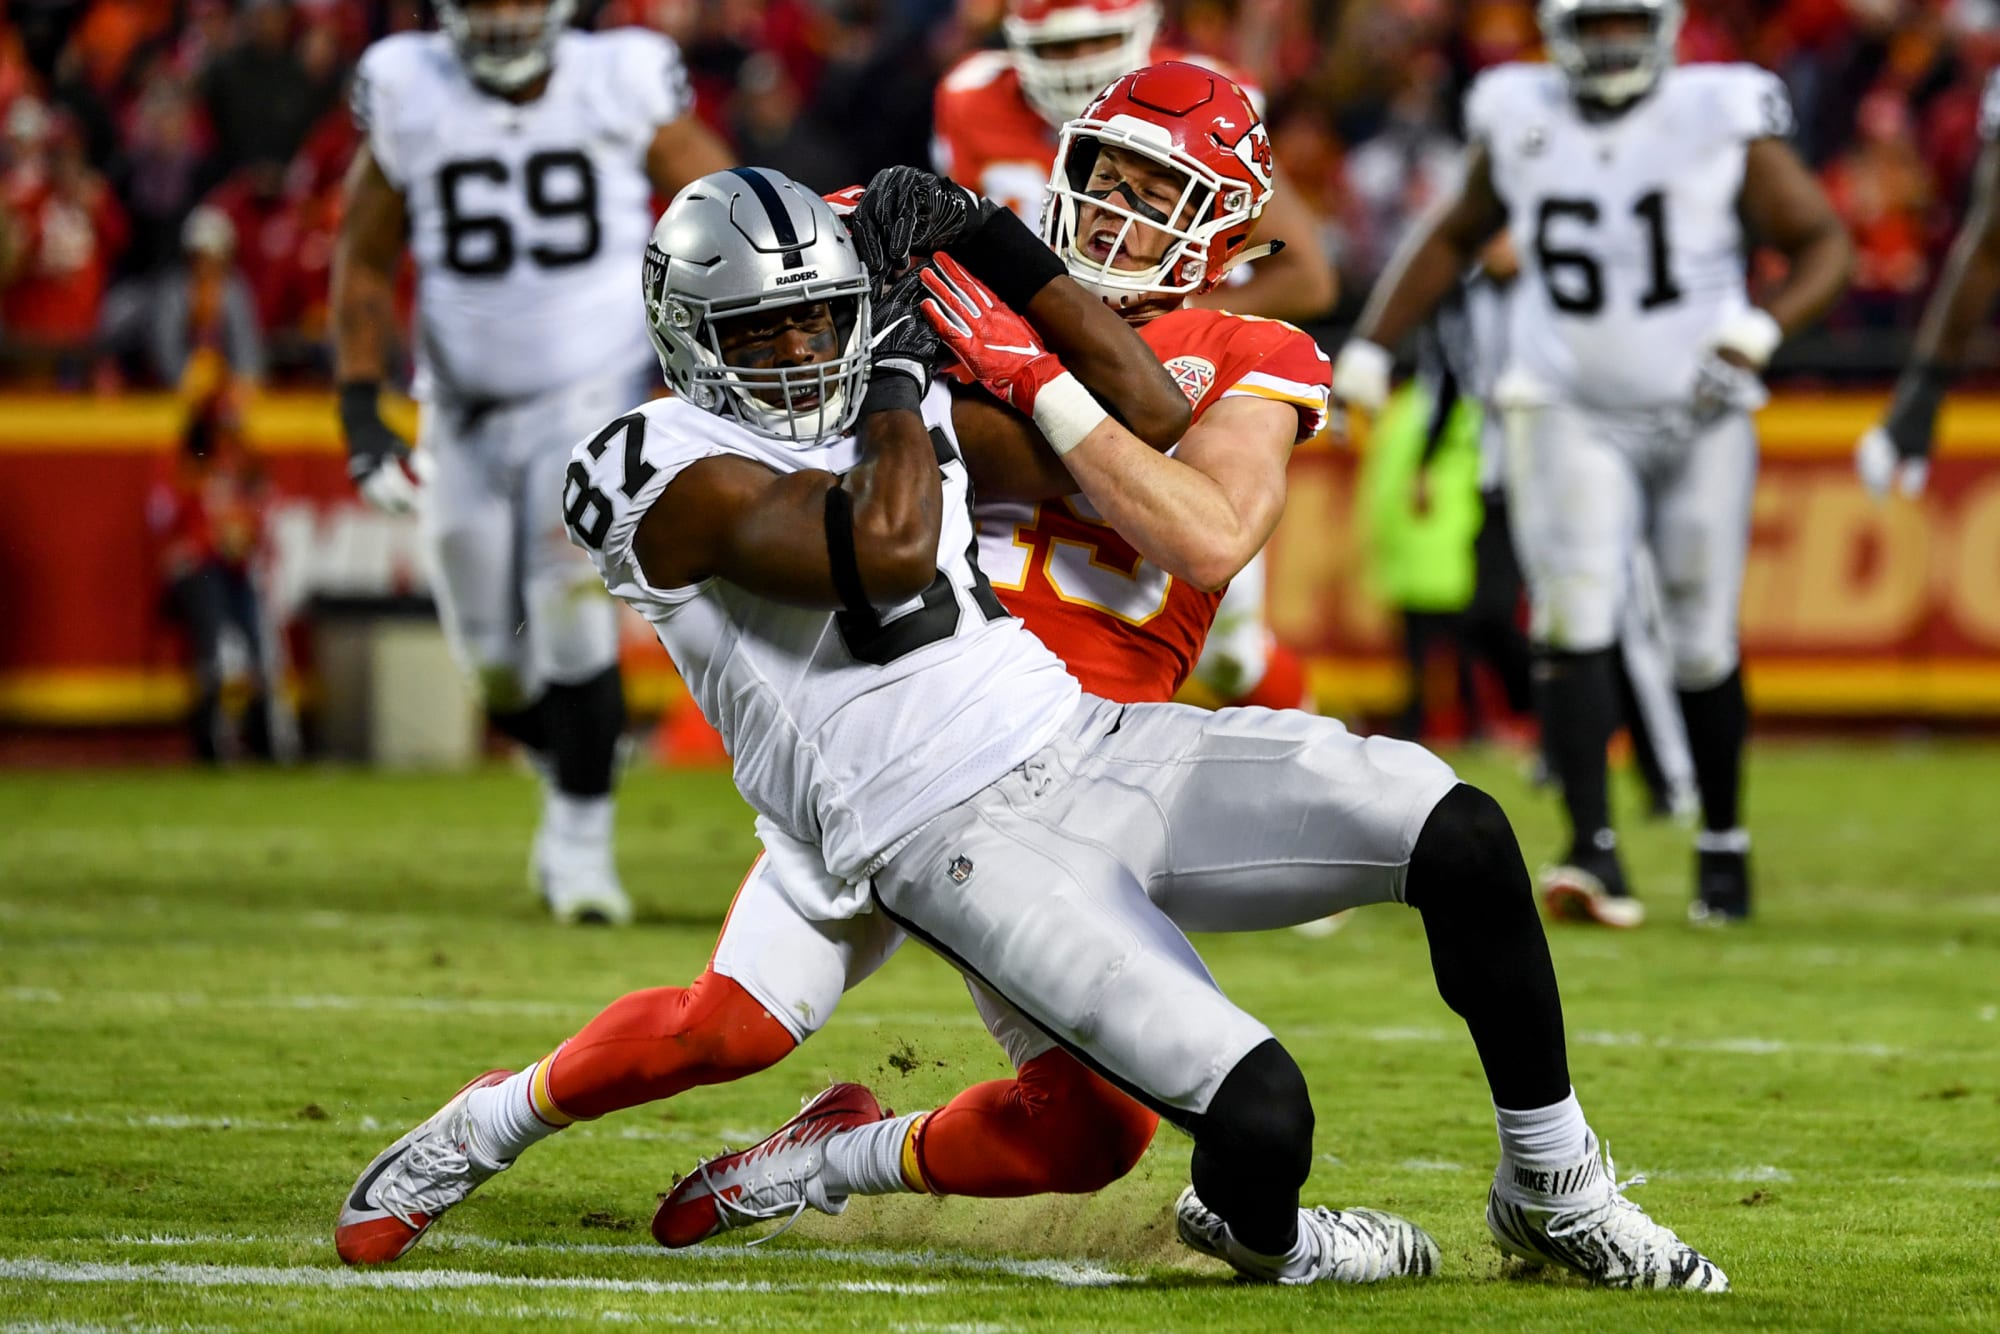 Kansas City Chiefs: Jared Cook would give Chiefs deadly tight end duo